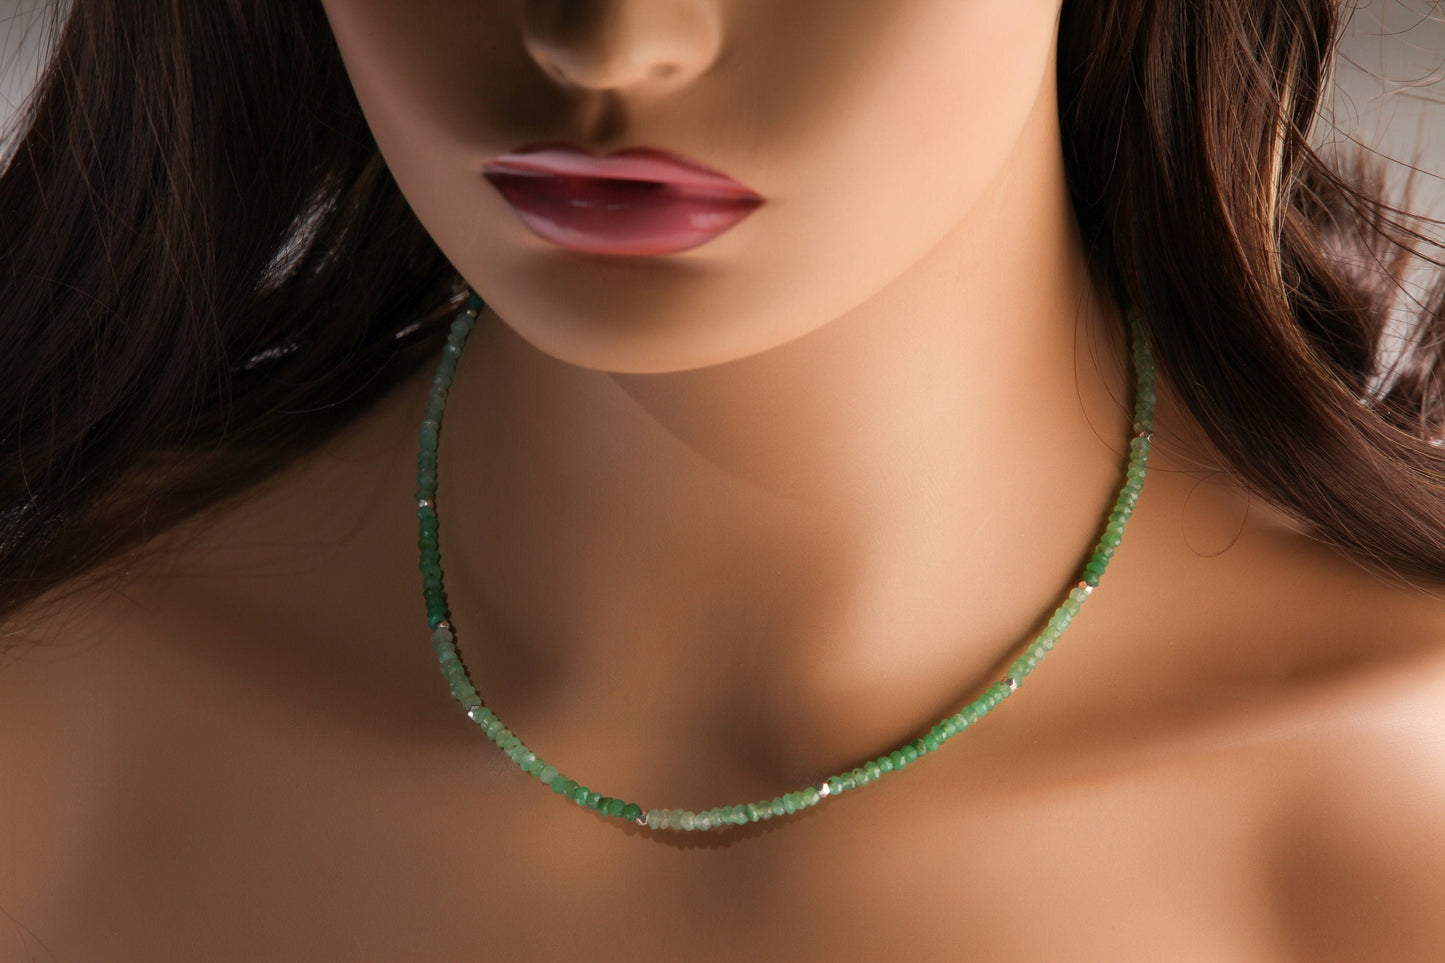 Chrysoprase Faceted 3.5mm ombré shaded Rondelle Choker Necklace in 925 Sterling Silver, soothing light green ,Woman gifts, Birthday